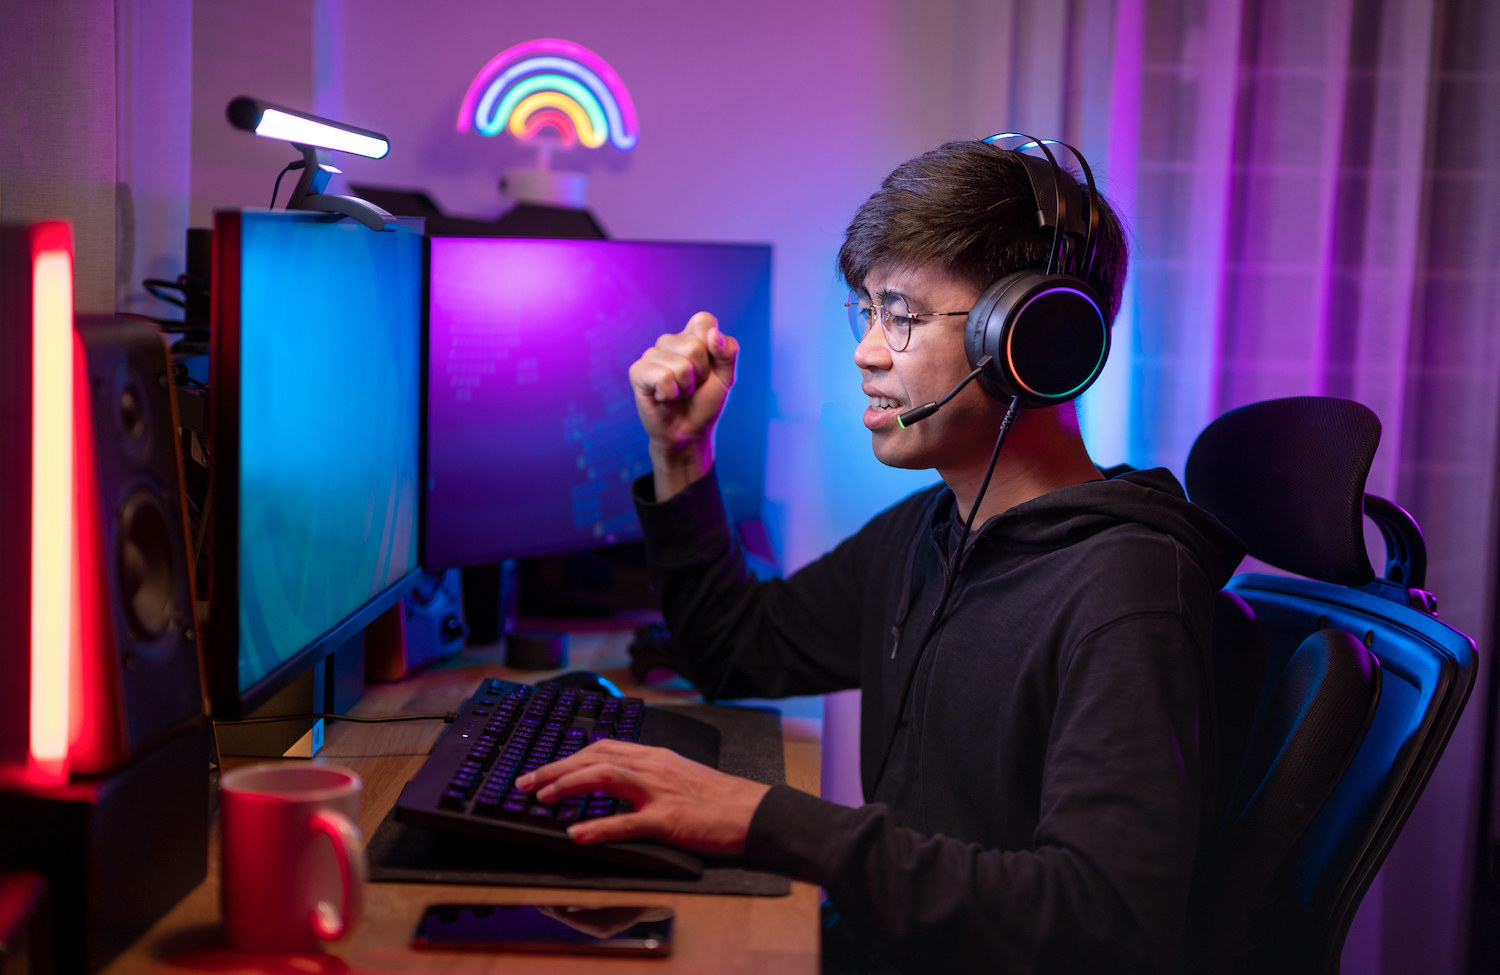 A man with headphones on in front of multiple computer screens